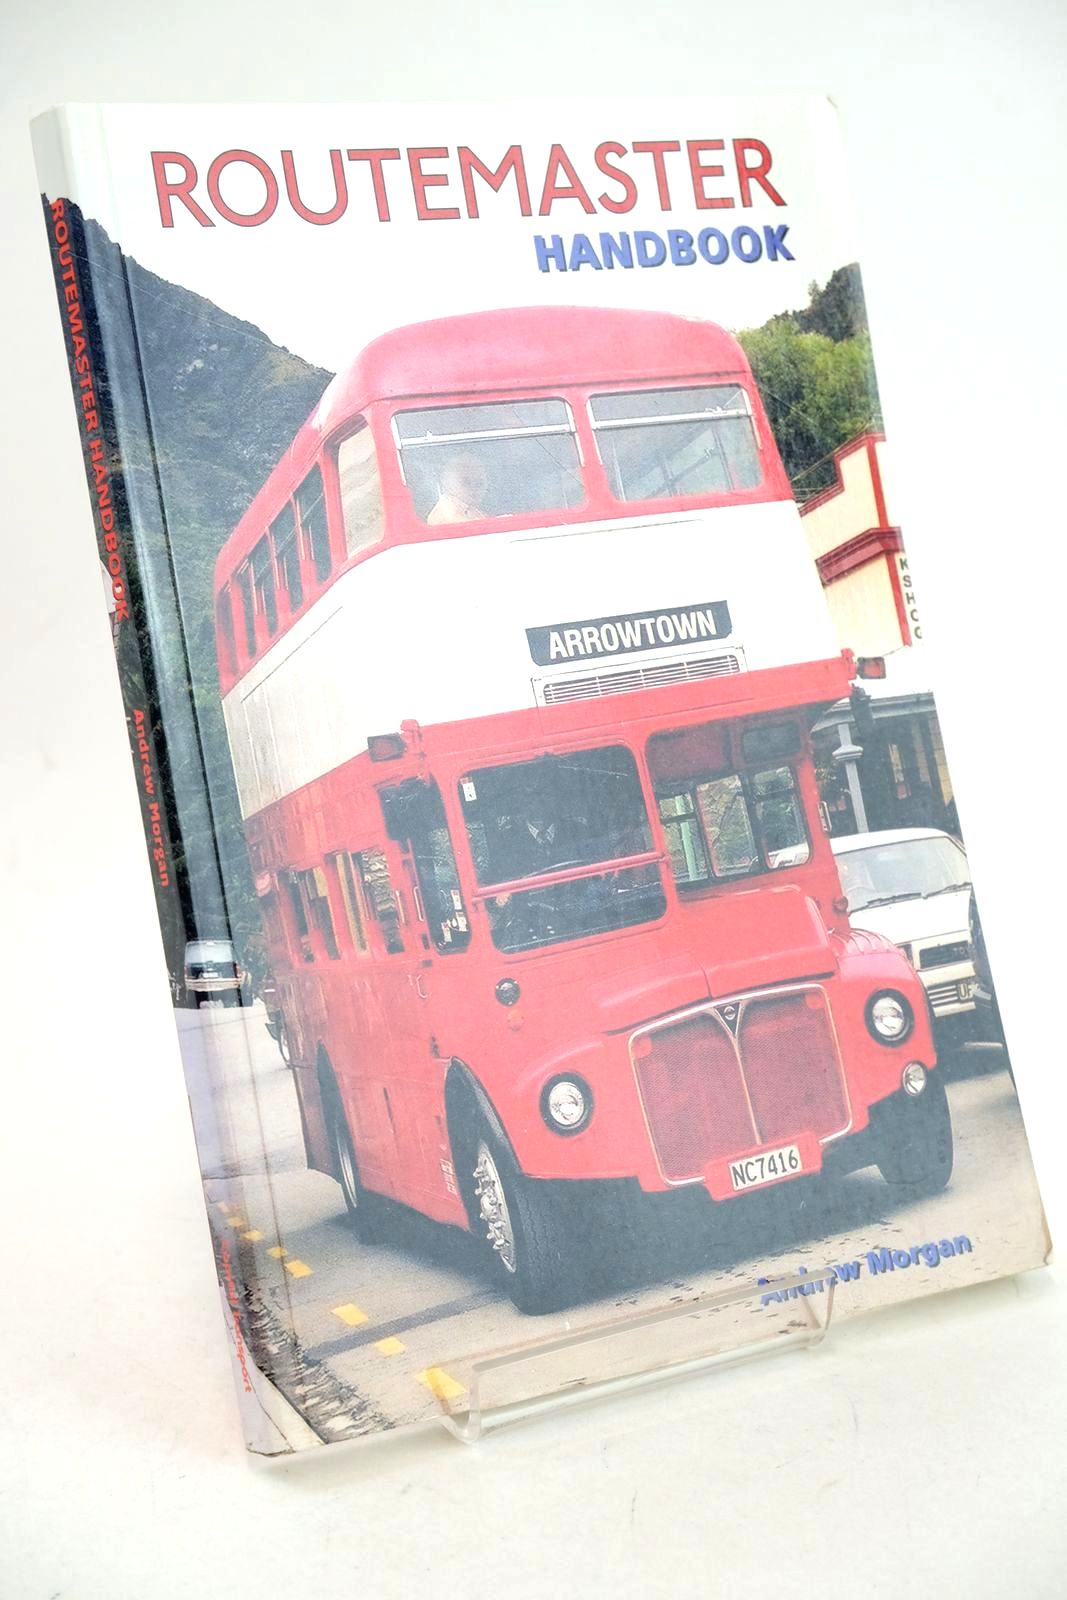 Photo of ROUTEMASTER HANDBOOK written by Morgan, Andrew published by Capital Transport (STOCK CODE: 1326944)  for sale by Stella & Rose's Books